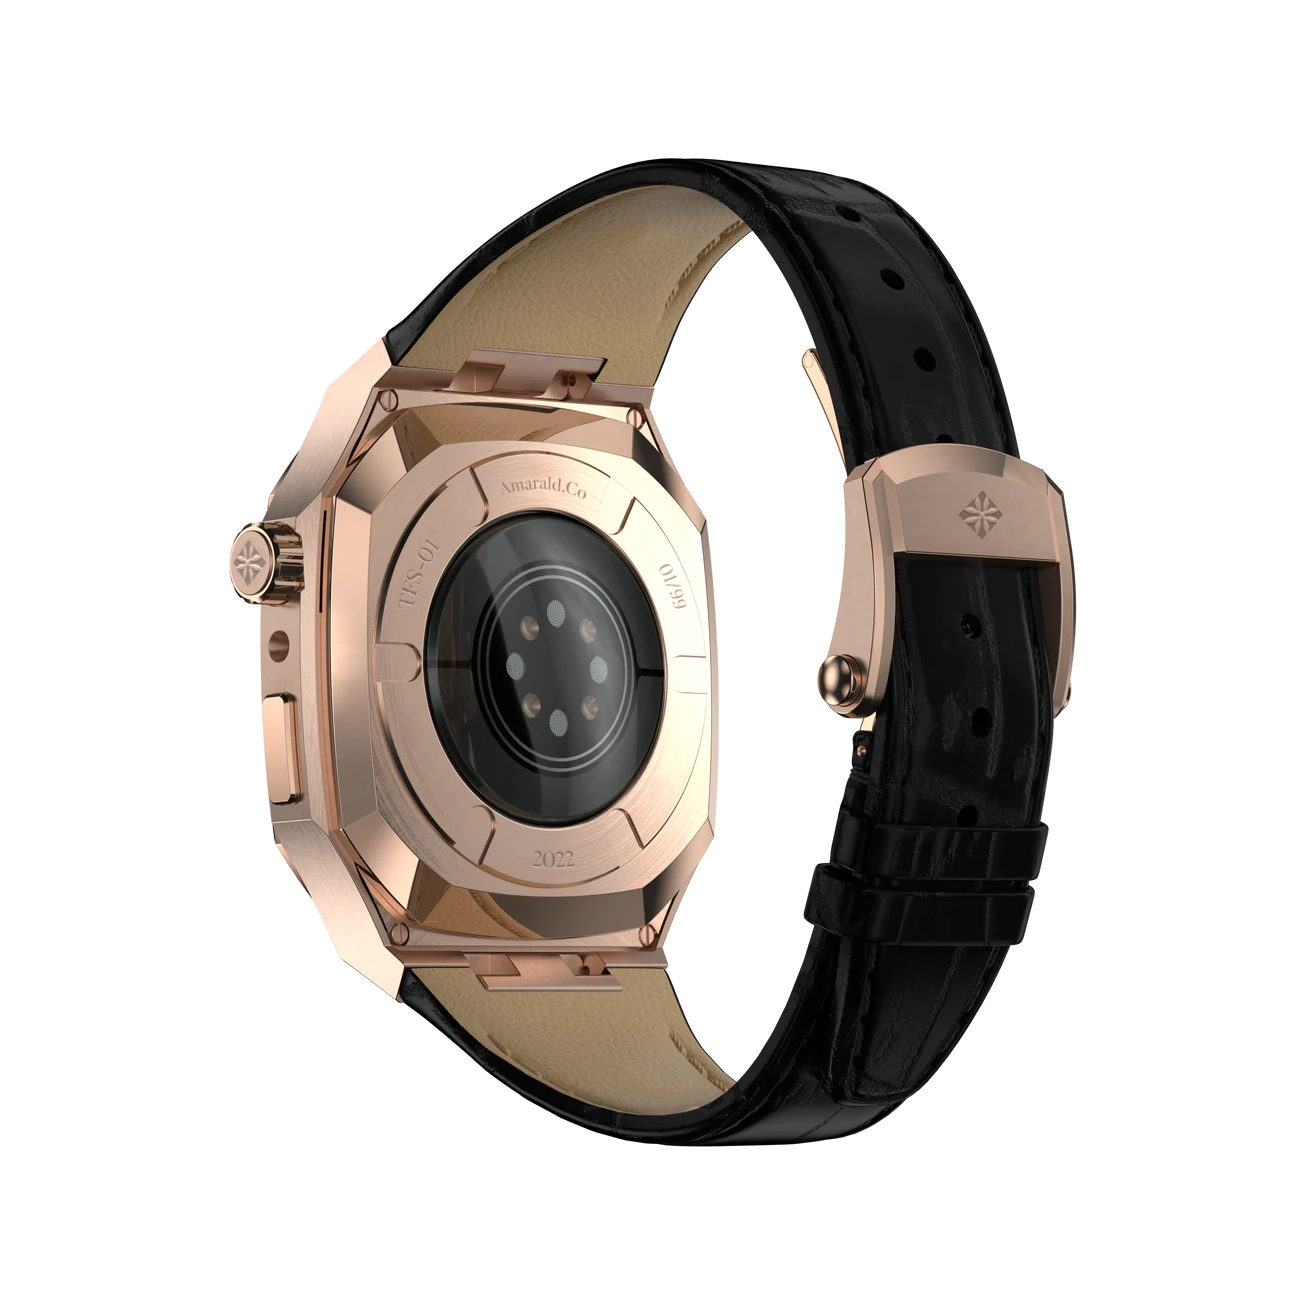 Black Rose Gold Stainless Steel Silicon Classic